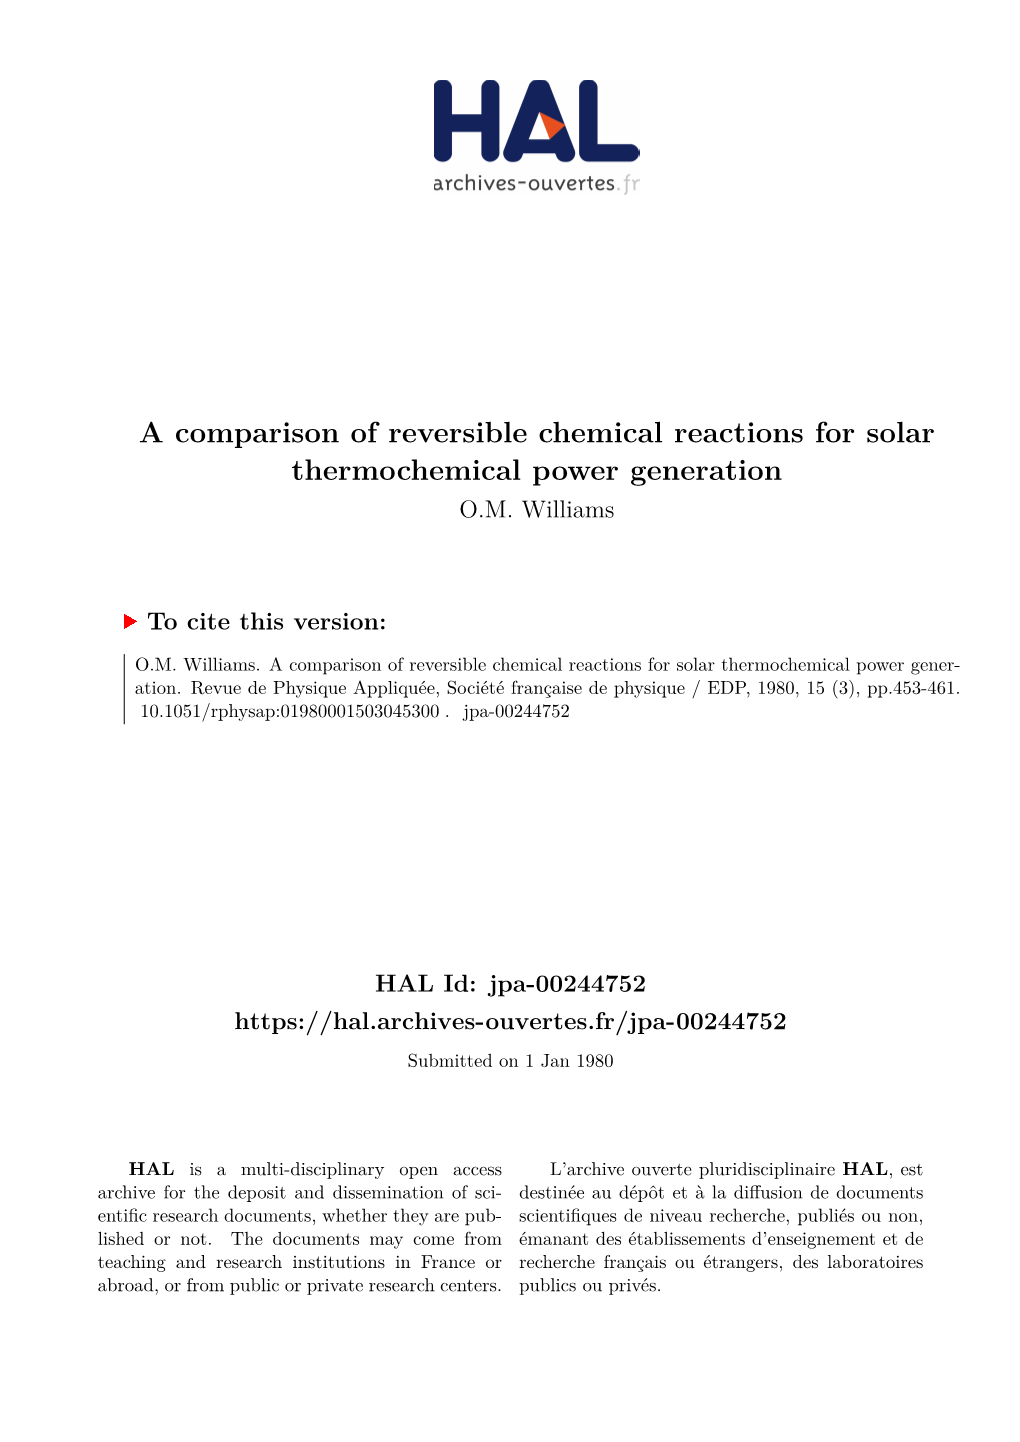 A Comparison of Reversible Chemical Reactions for Solar Thermochemical Power Generation O.M